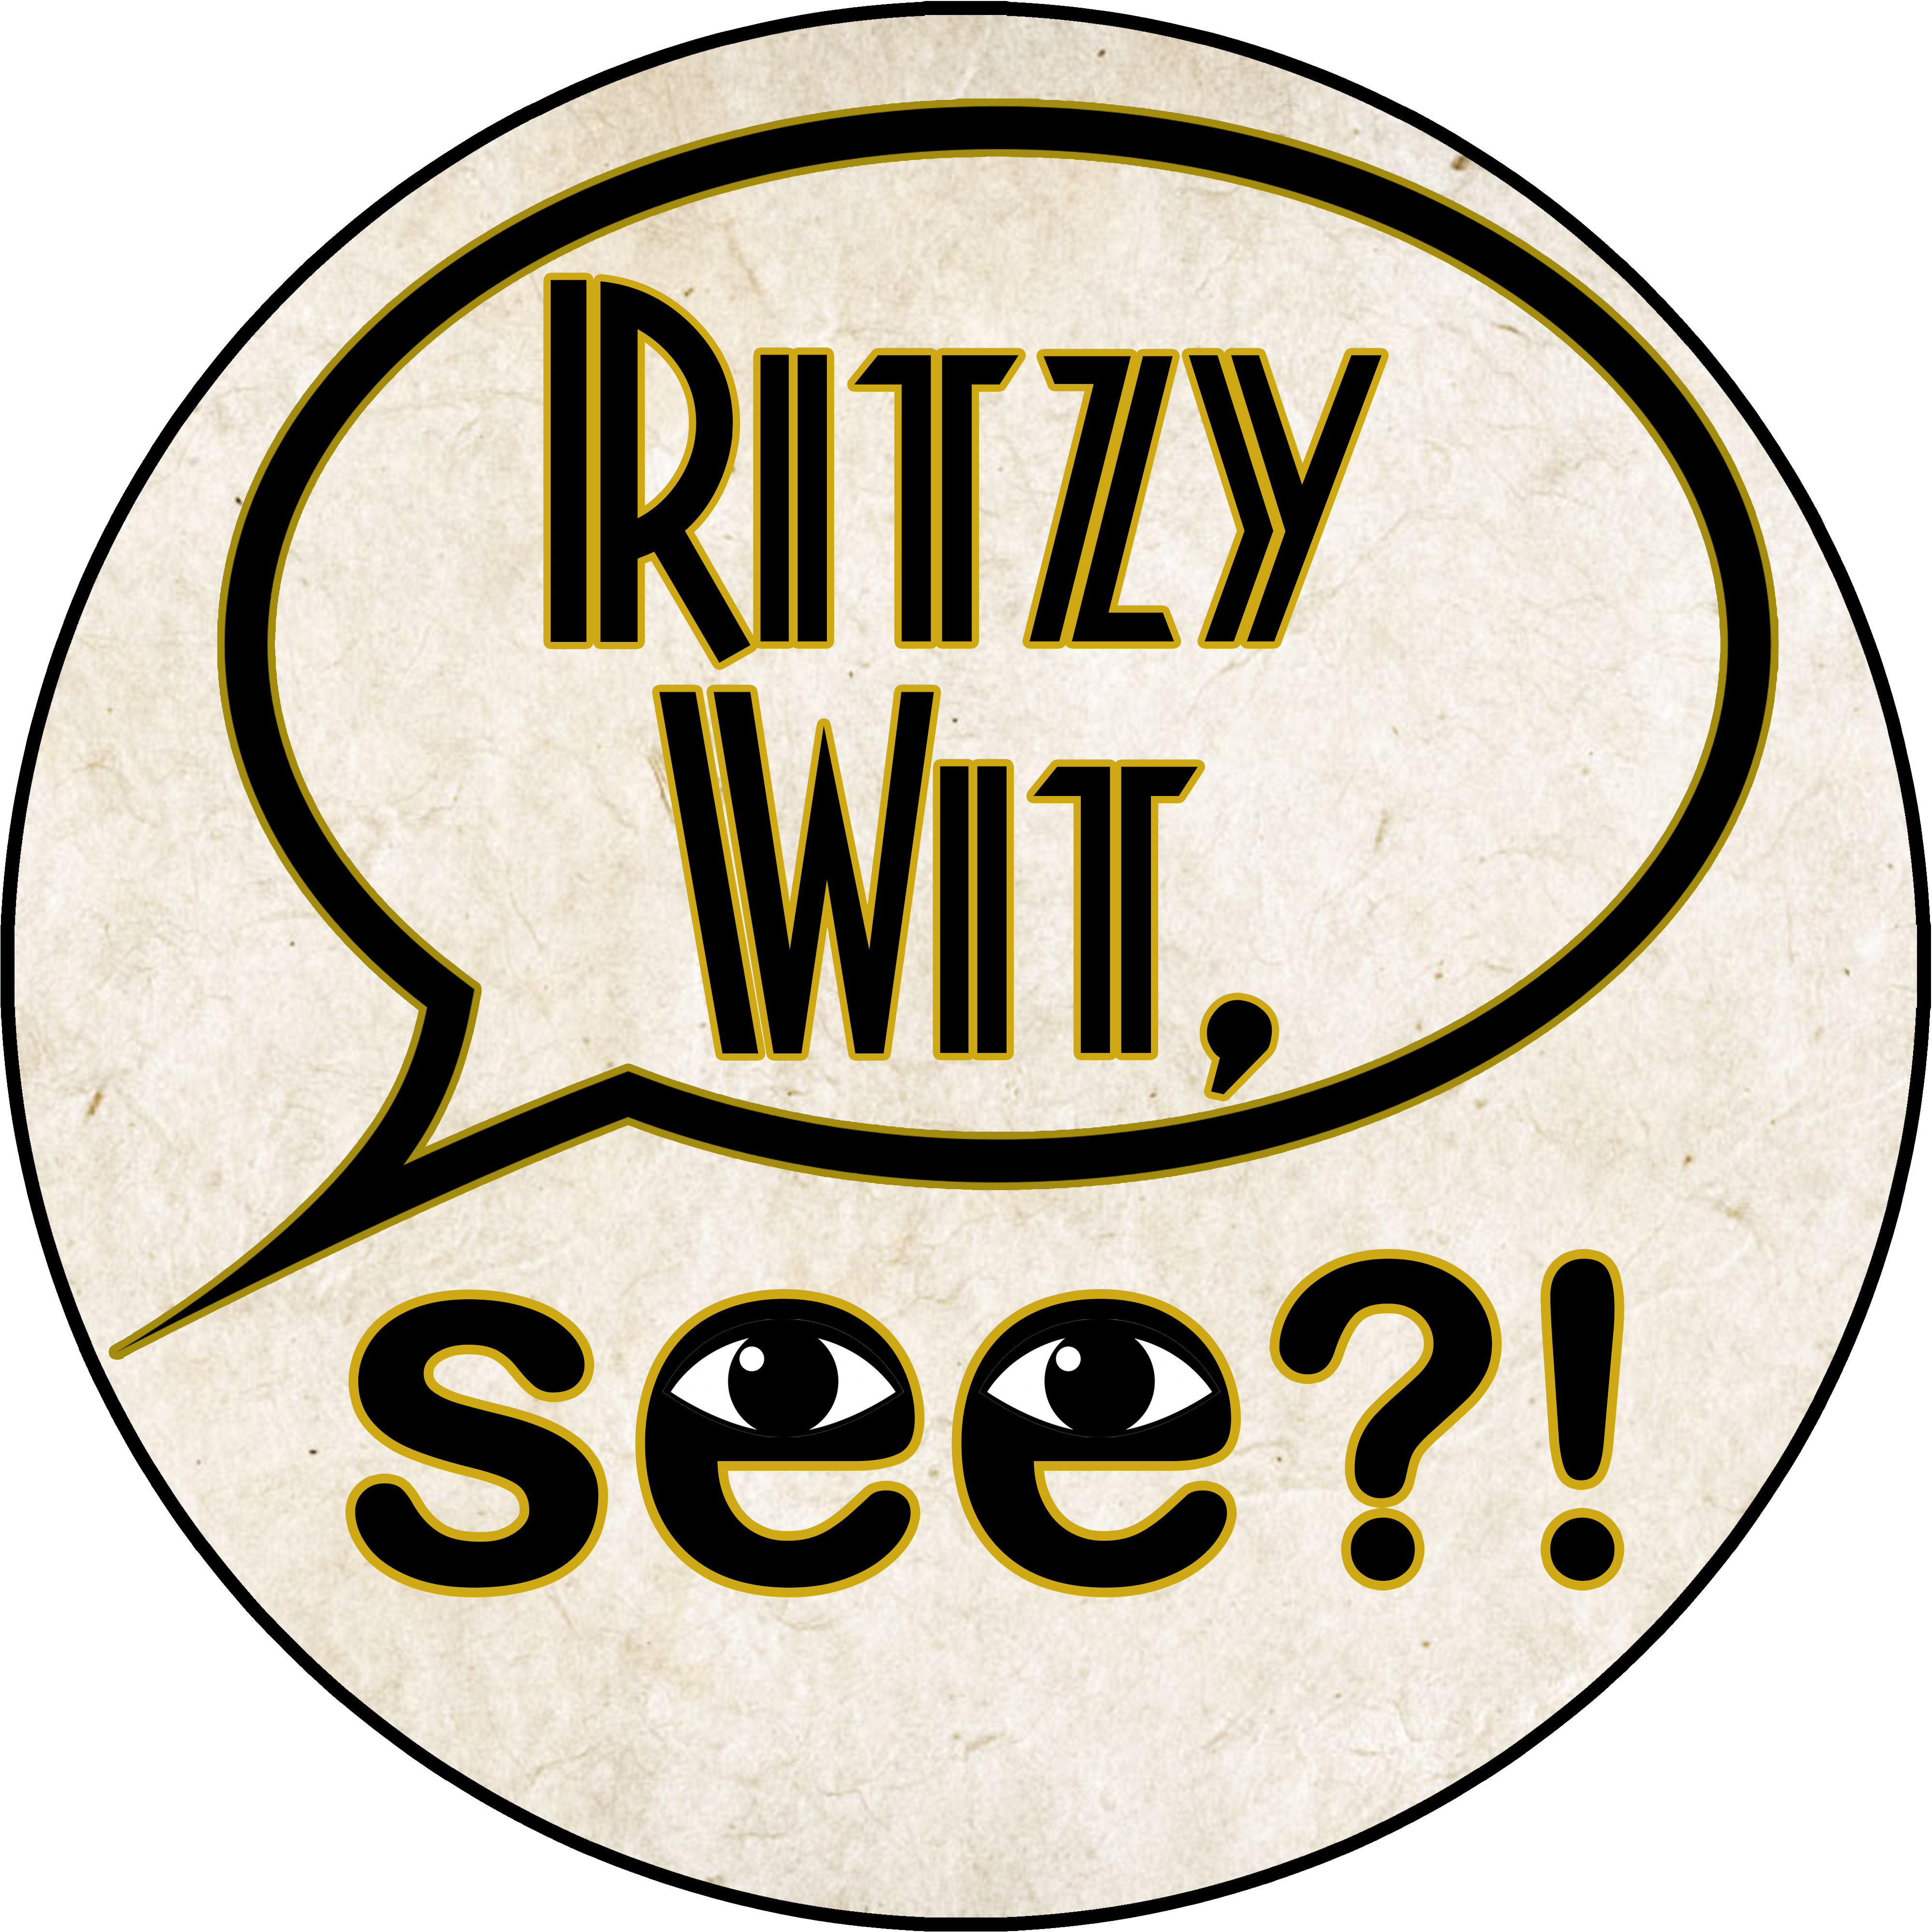 Ritzy Wit, See?!